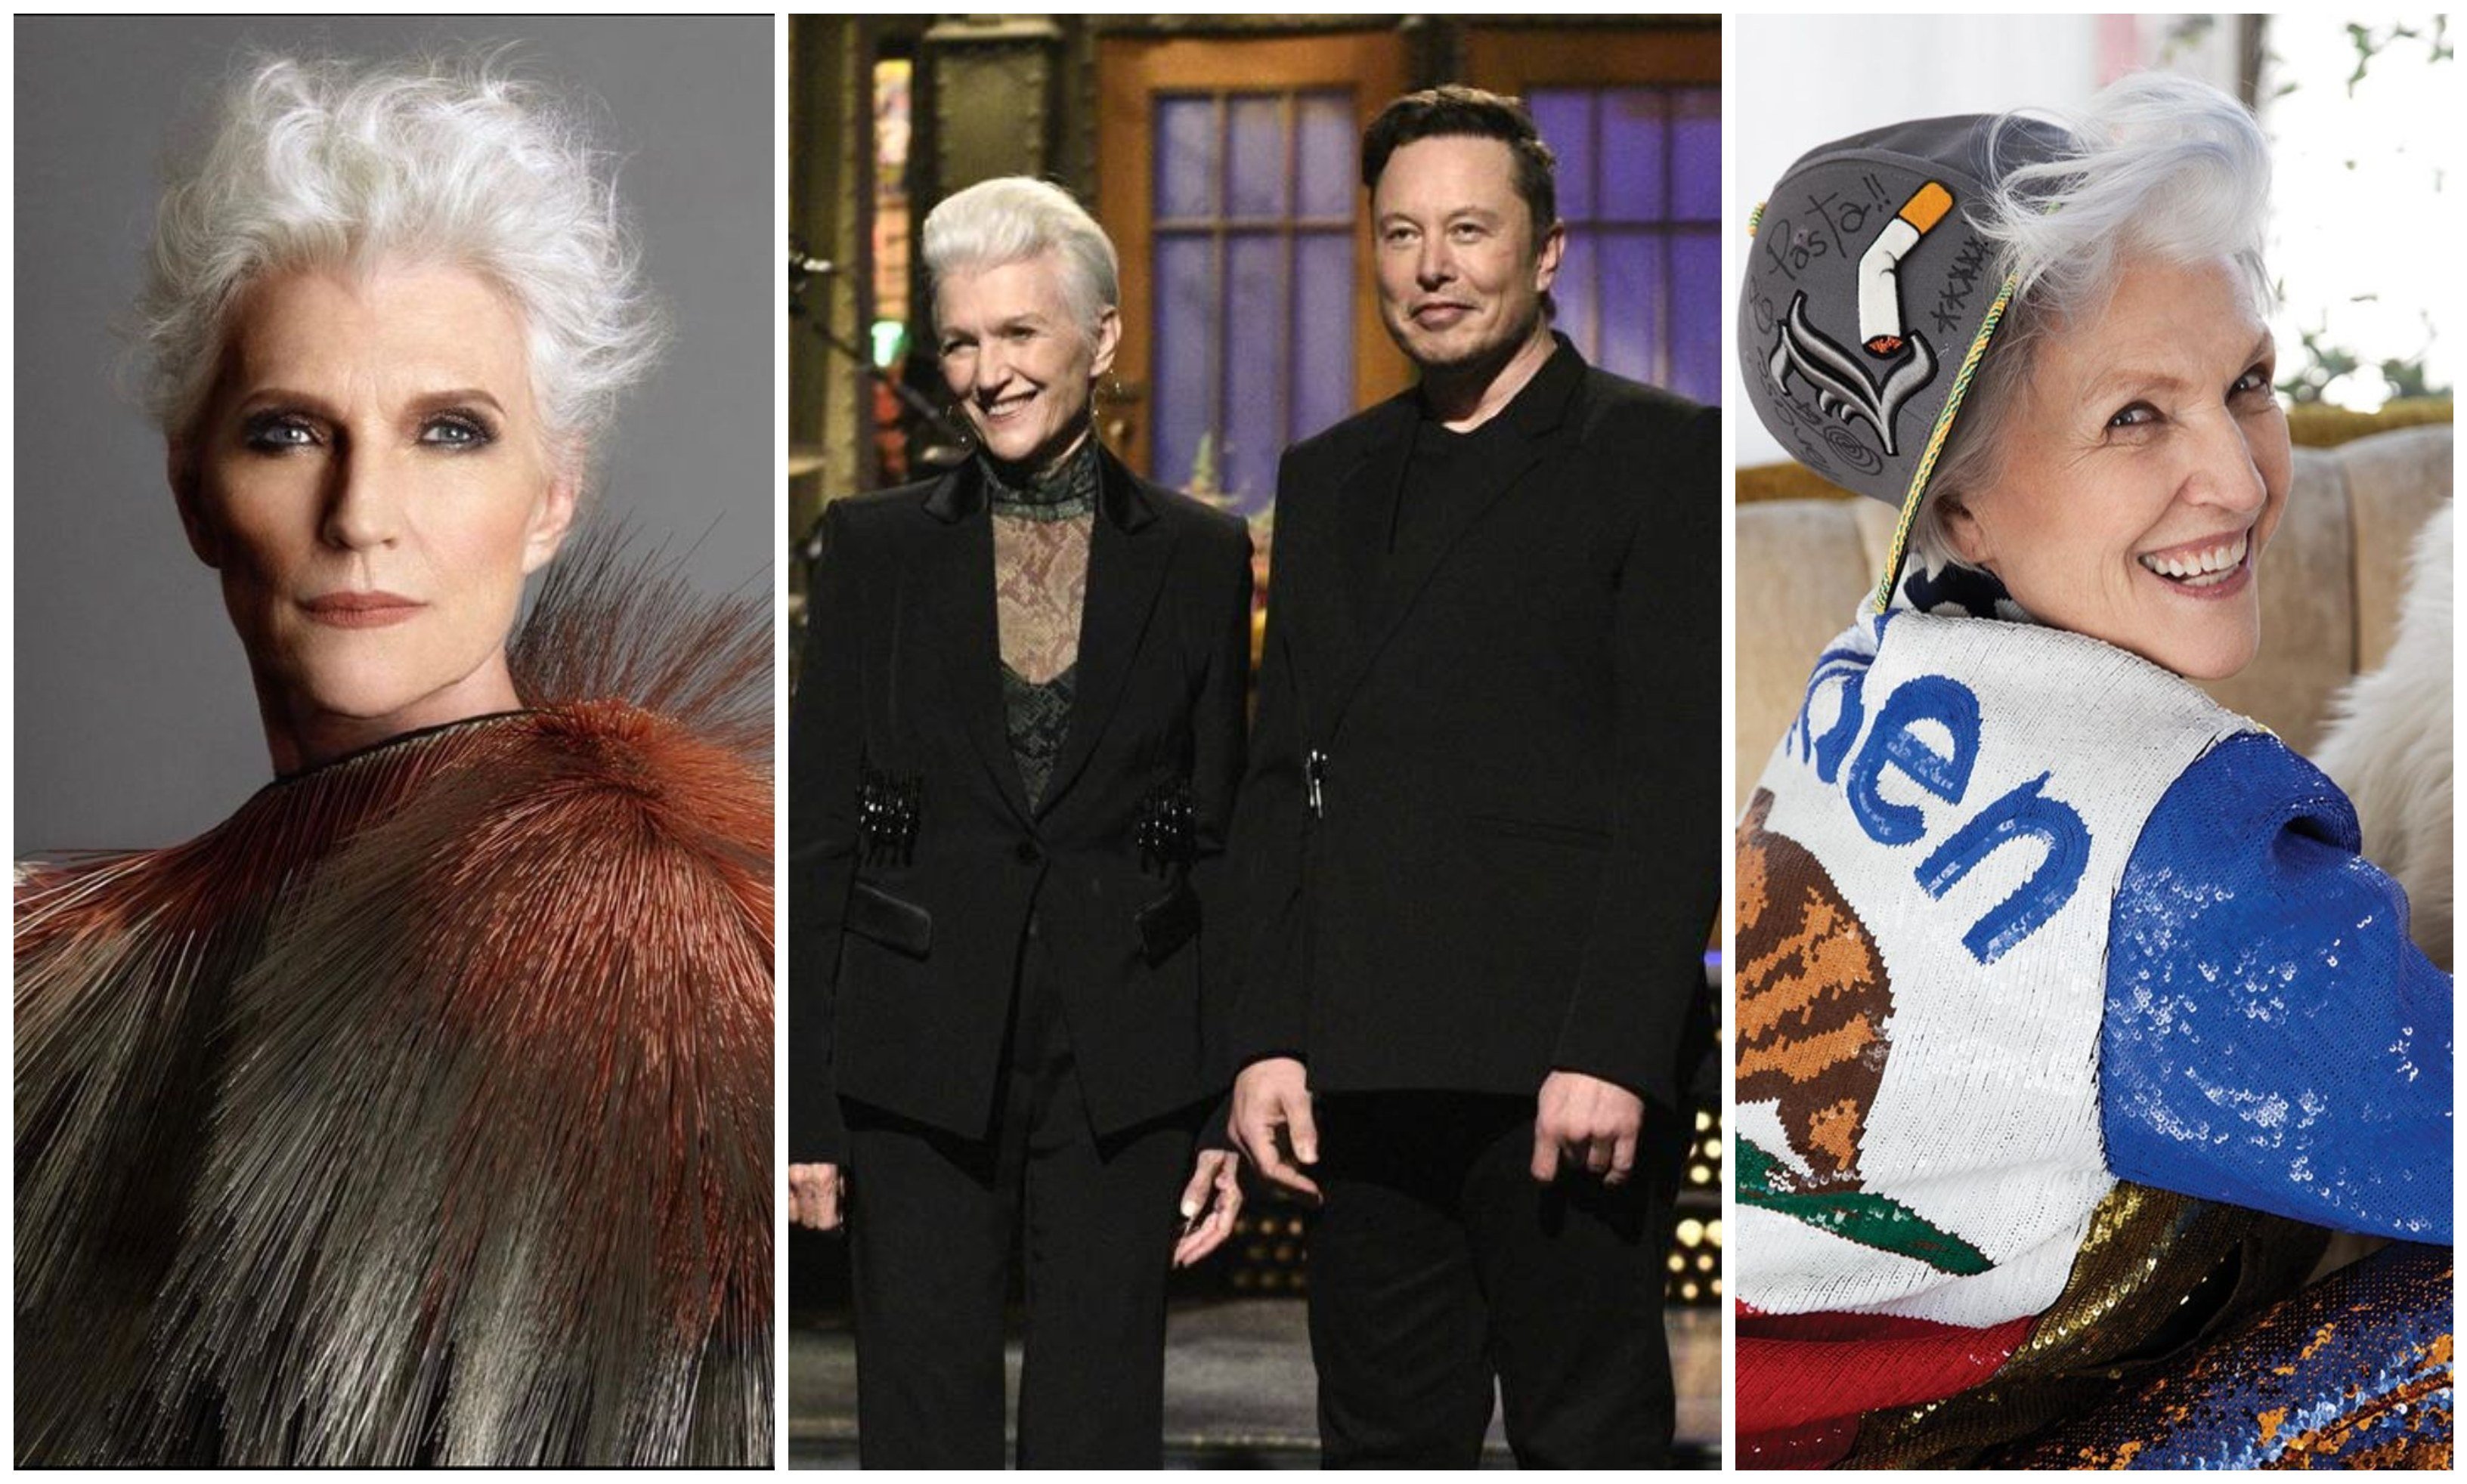 Maye Musk, Elon’s 73-year-old mum is a model, author and dietician worth millions in her own right. Photo: IG @mayemusk